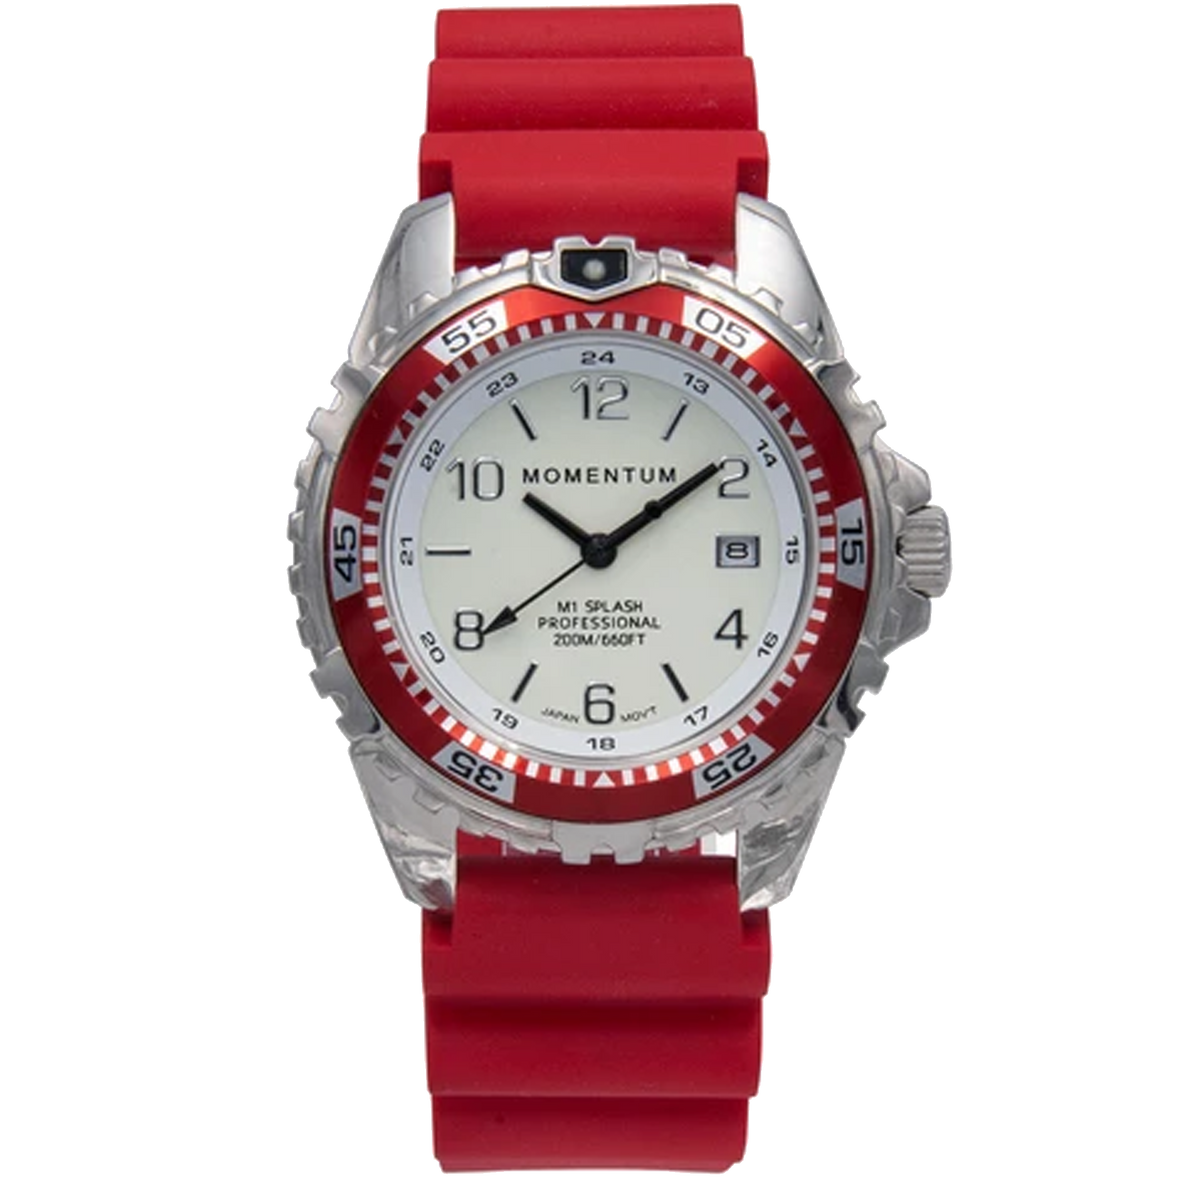 Momentum M1 Splash - White Dial with Red Rubber